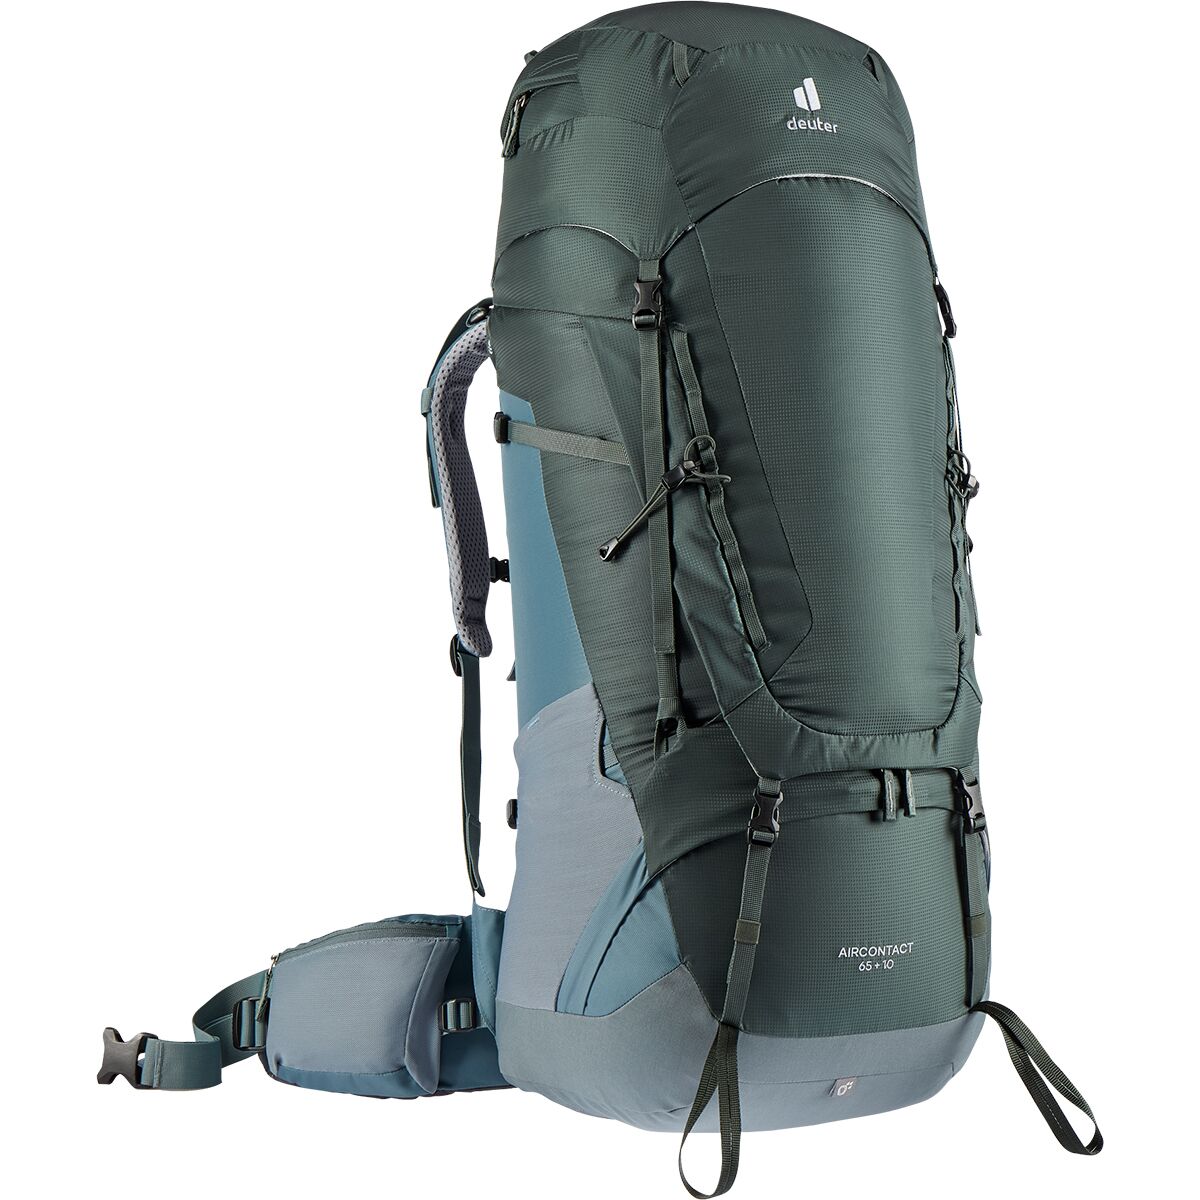 opportunity balloon surround Deuter Aircontact 65+10L Backpack - Hike & Camp